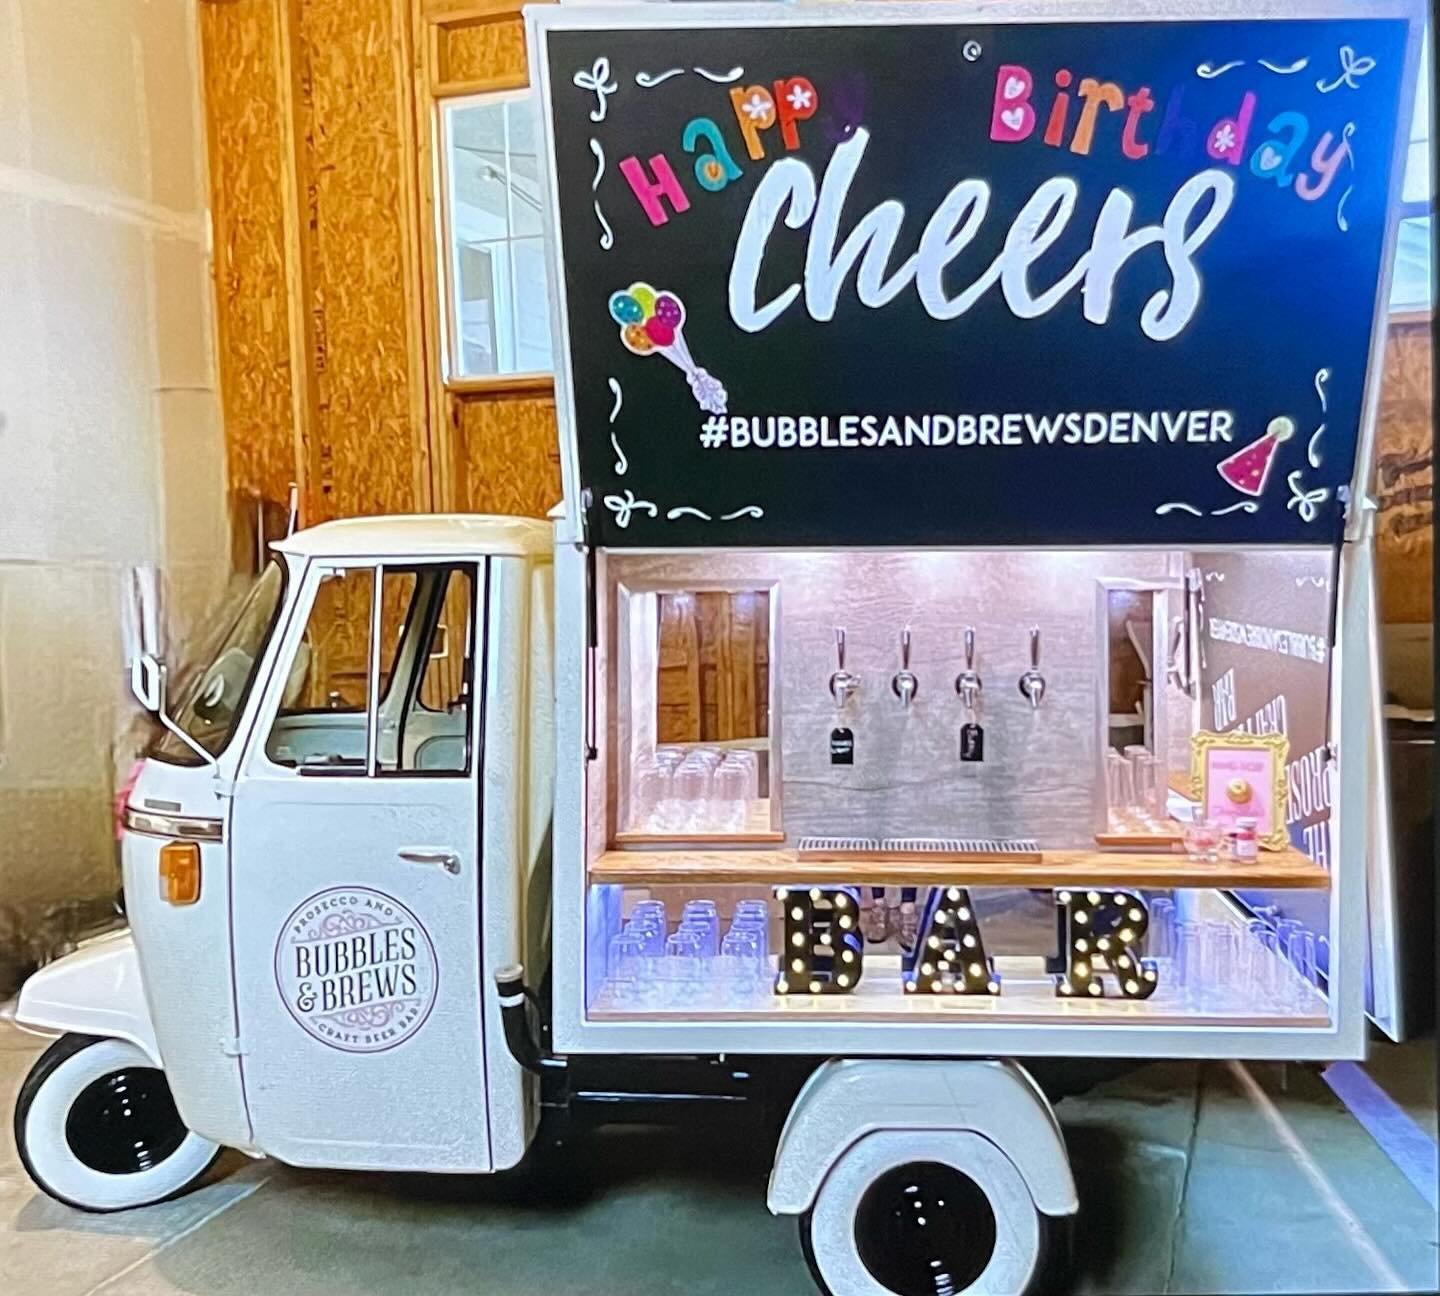 🎉🎈Surprise! 🎈🎉 Who doesn&rsquo;t love a good surprise party? The excitement, the joy, the fun - it&rsquo;s all part of the thrill. Happy Birthday, Hailey! 🎉🎈
.
.
.
#bubblesandbrews #getcozyvintagemobilebars #mobilebar #getcozy #piaggio #drinks 